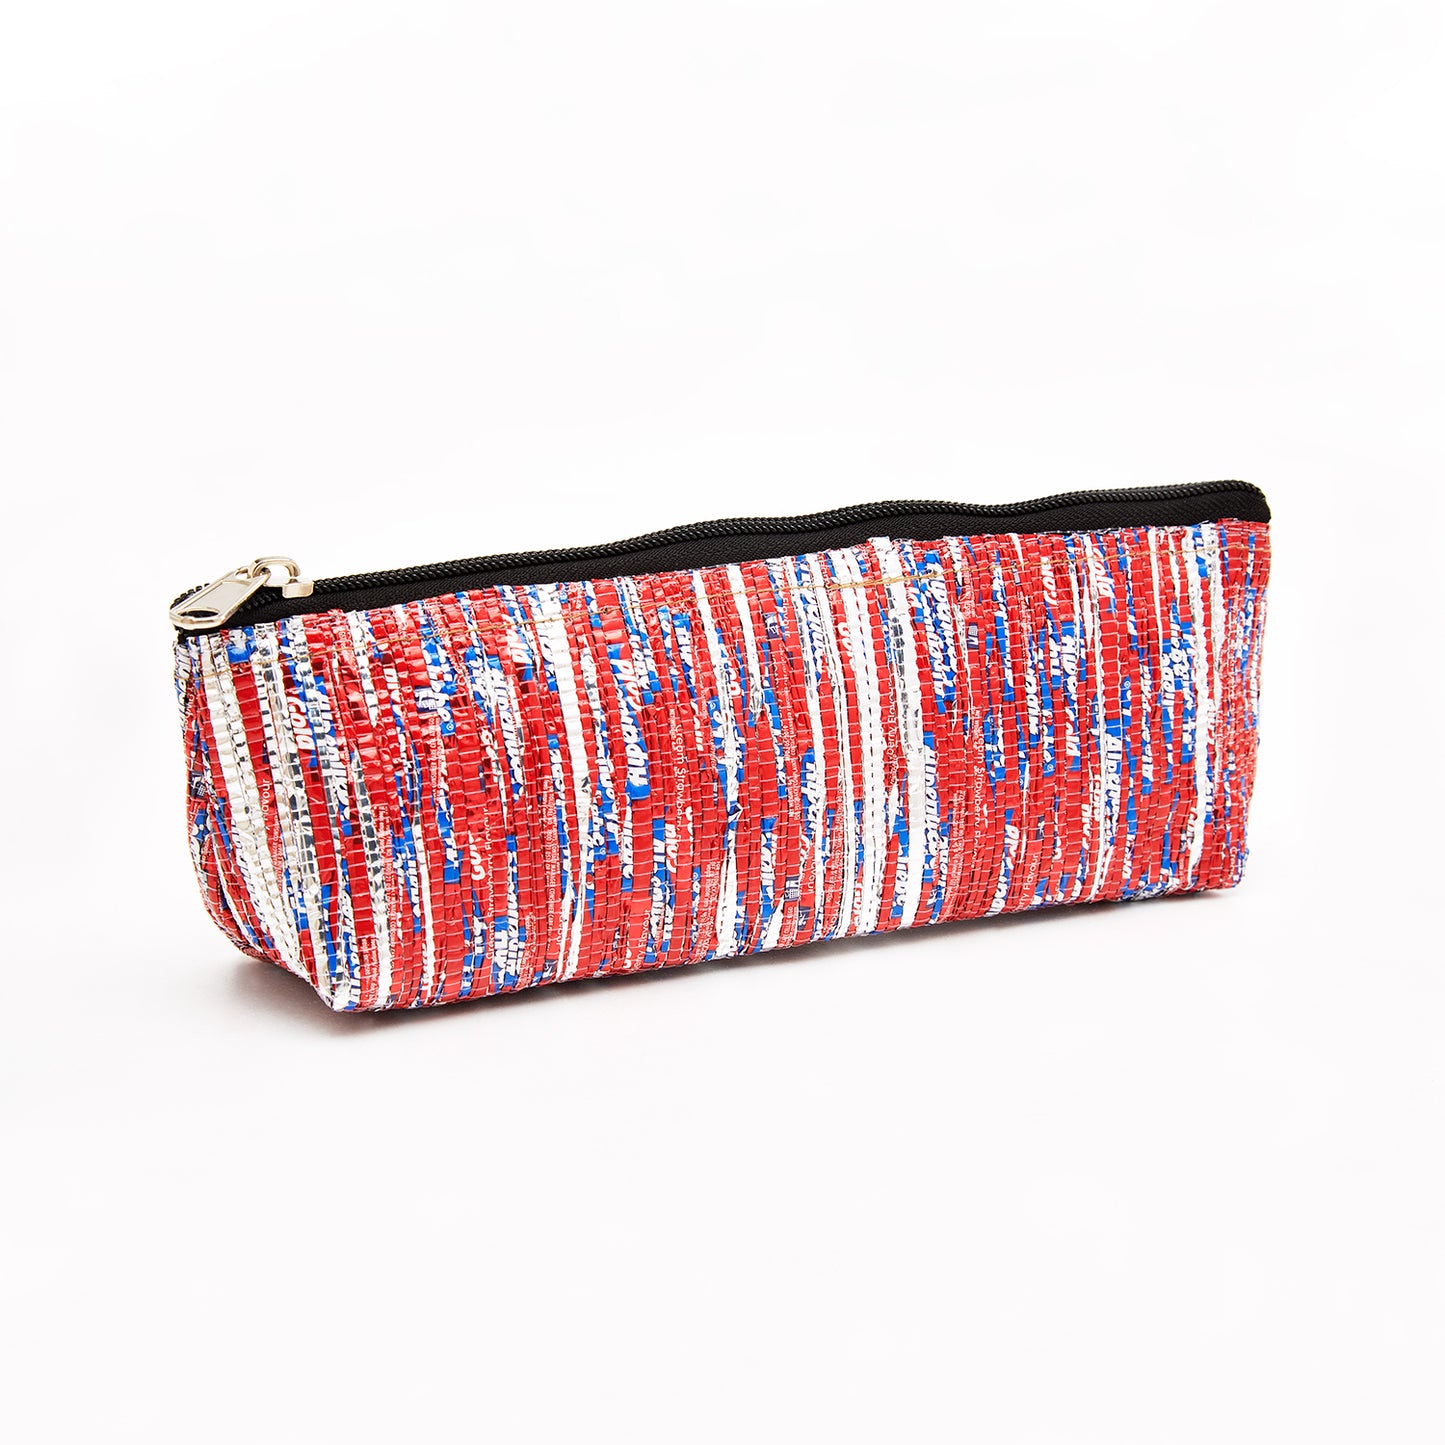 Red, Blue & Silver Recycled Plastic Pencil Pouch (MLP Plastic)